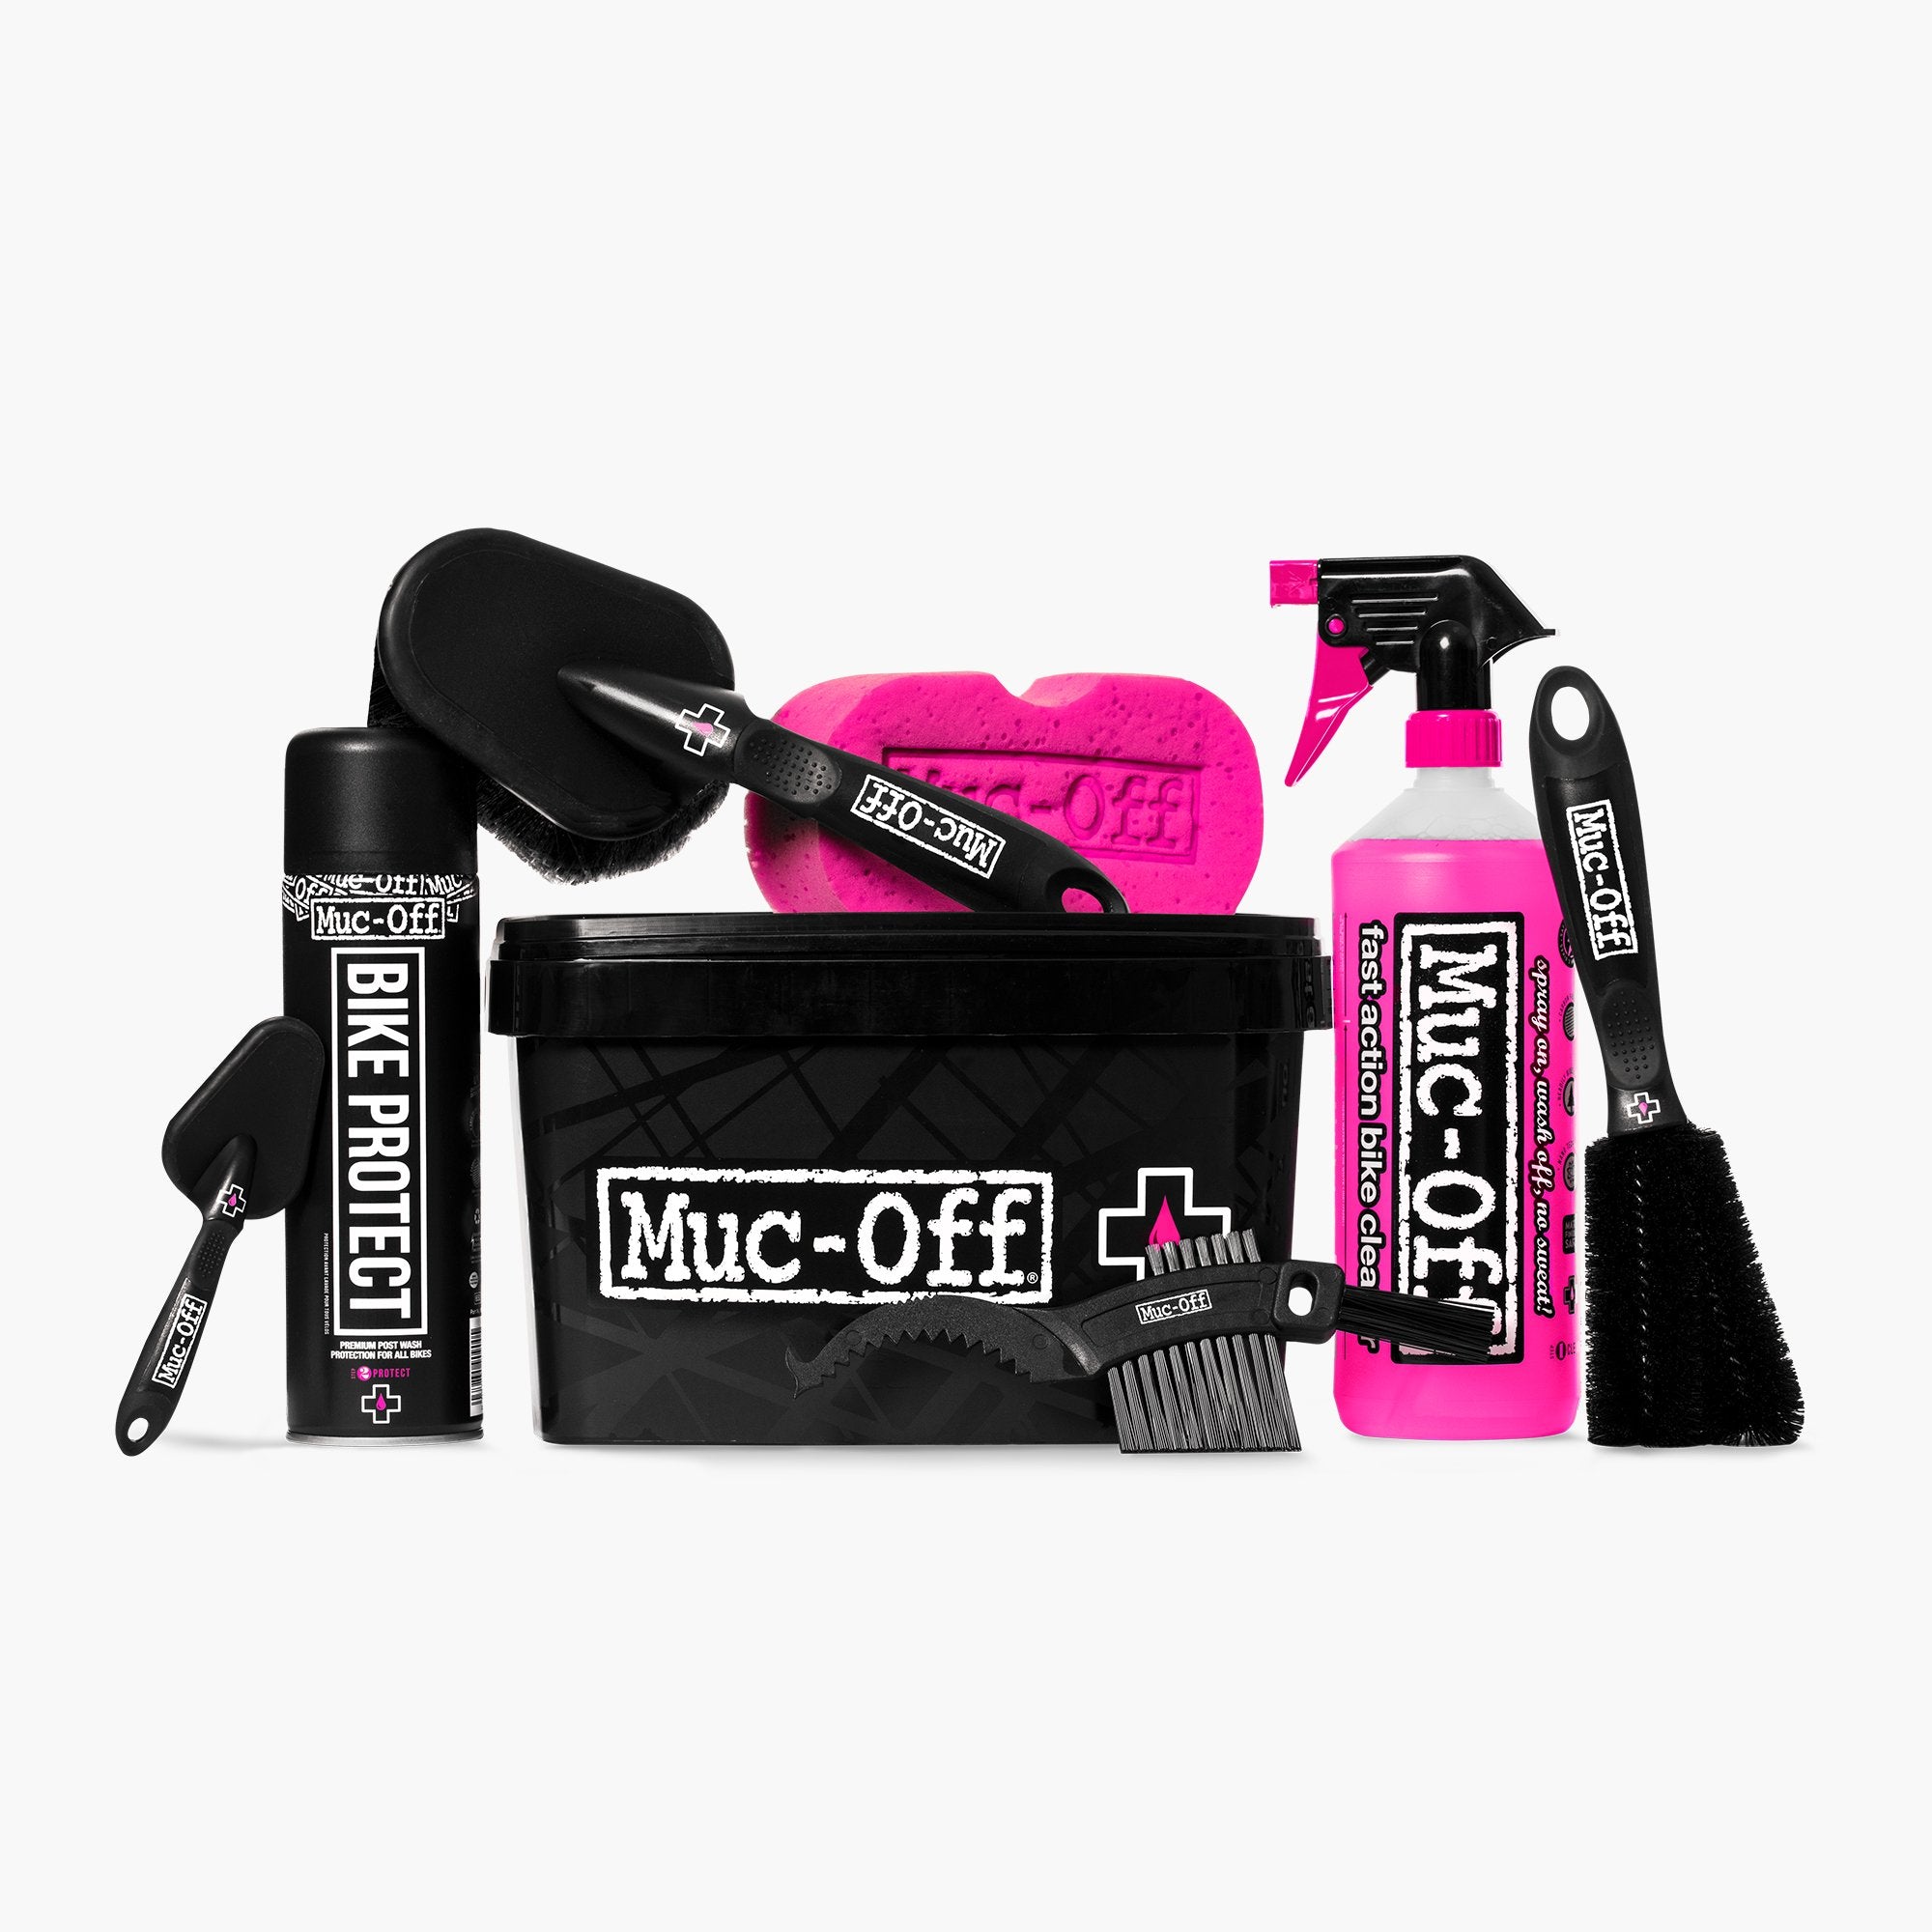 Muc-Off Kit Wash, Protect, Lube Kit with Dry Lube –